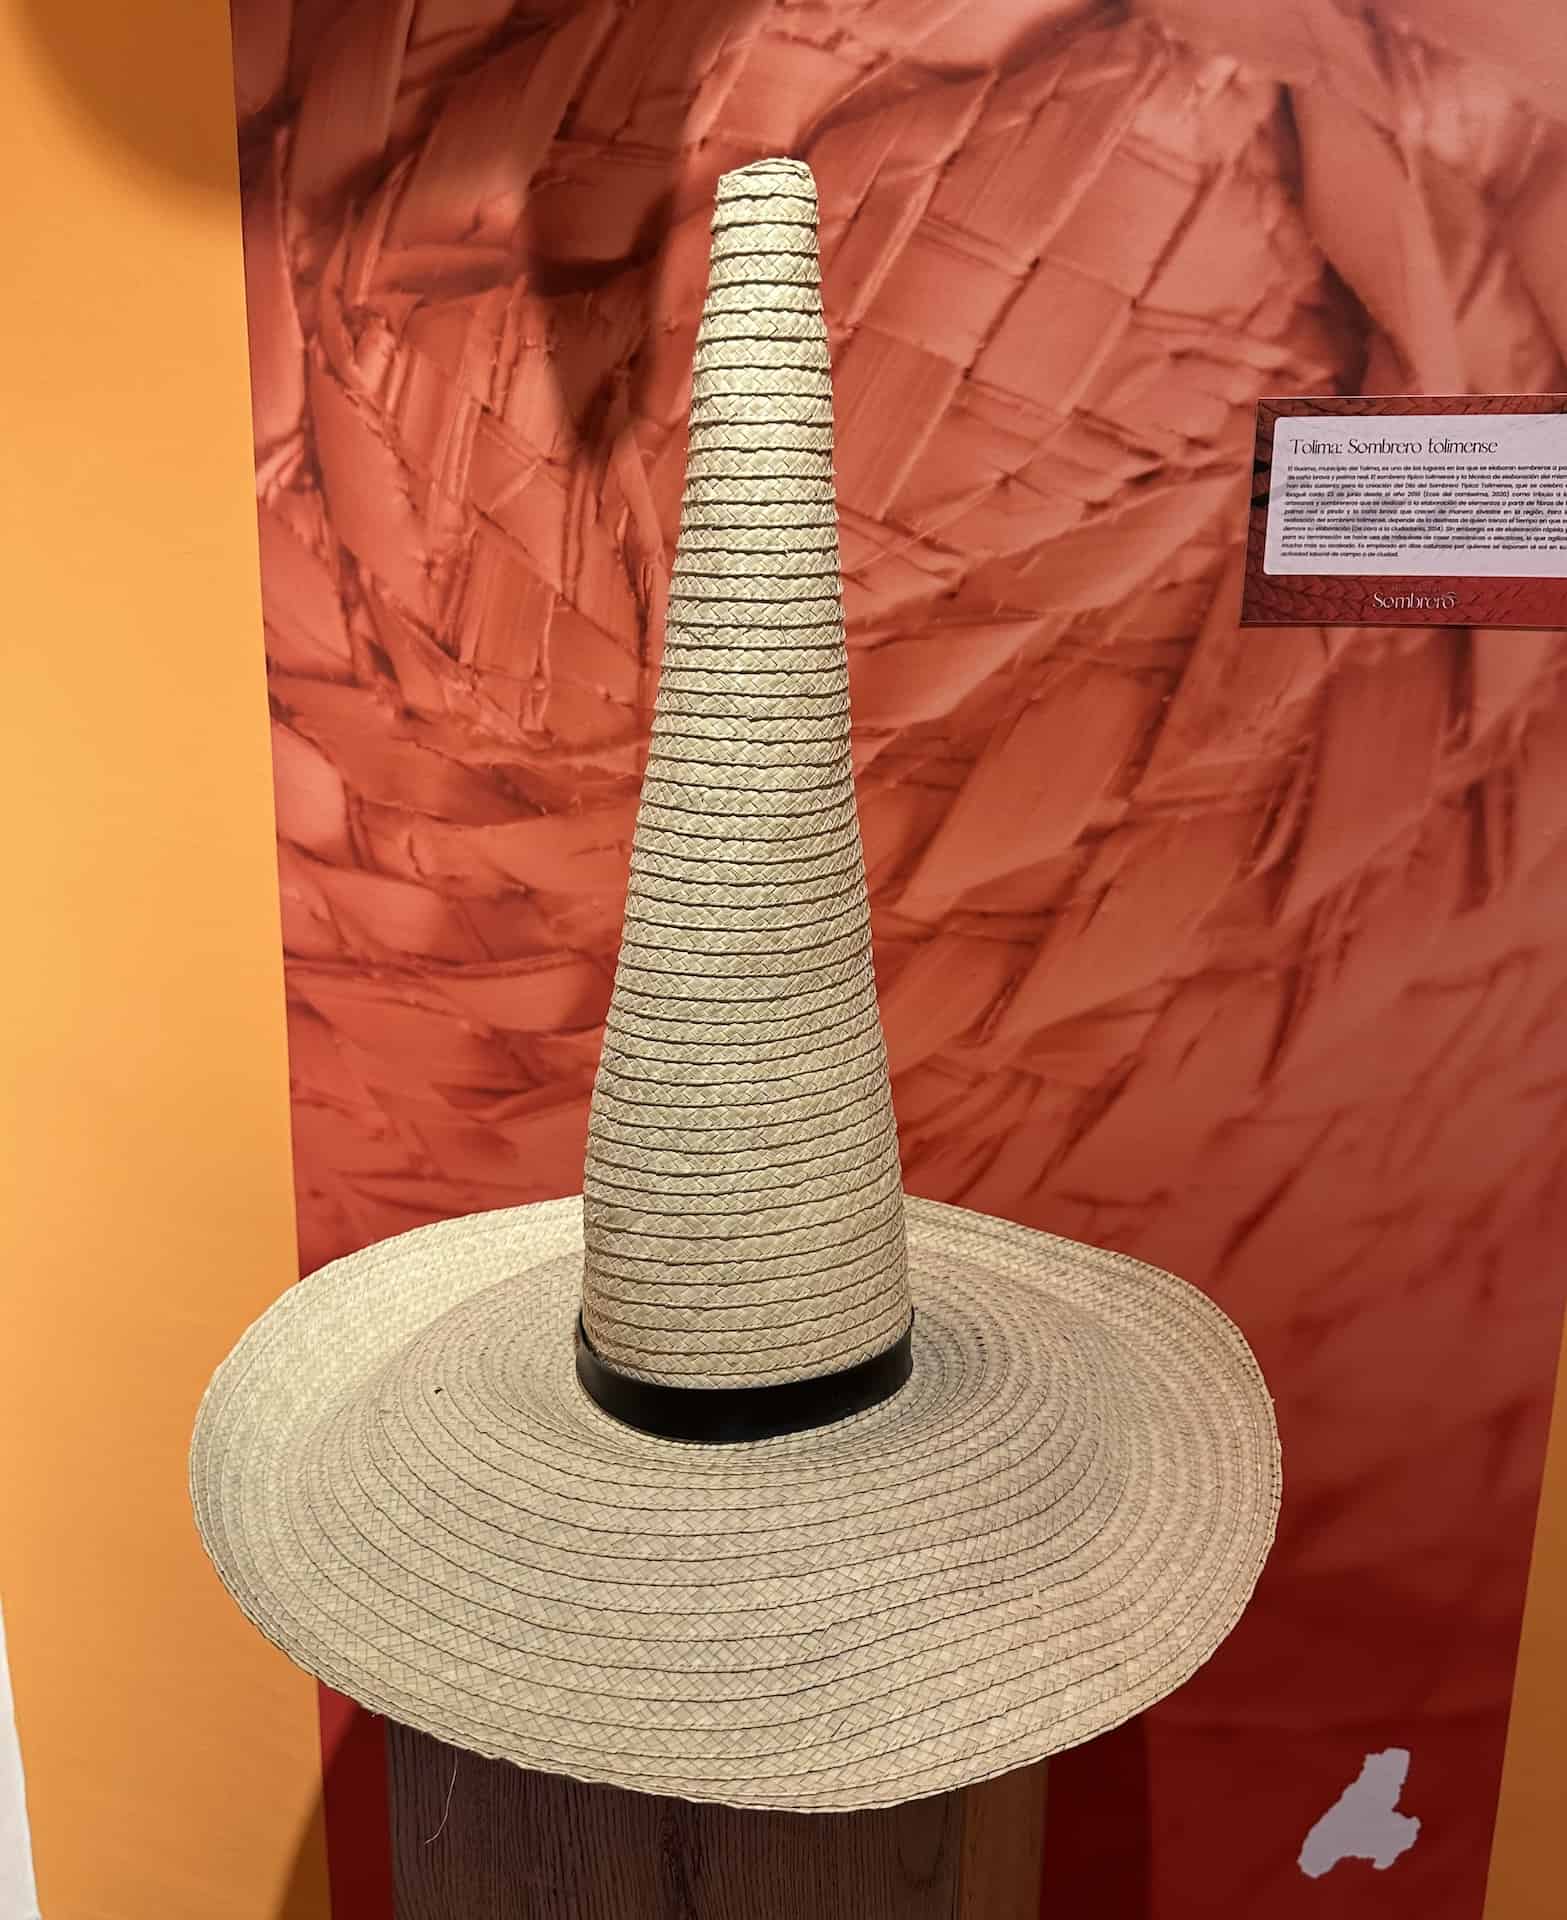 Sombrero tolimense at the National Museum of Hats